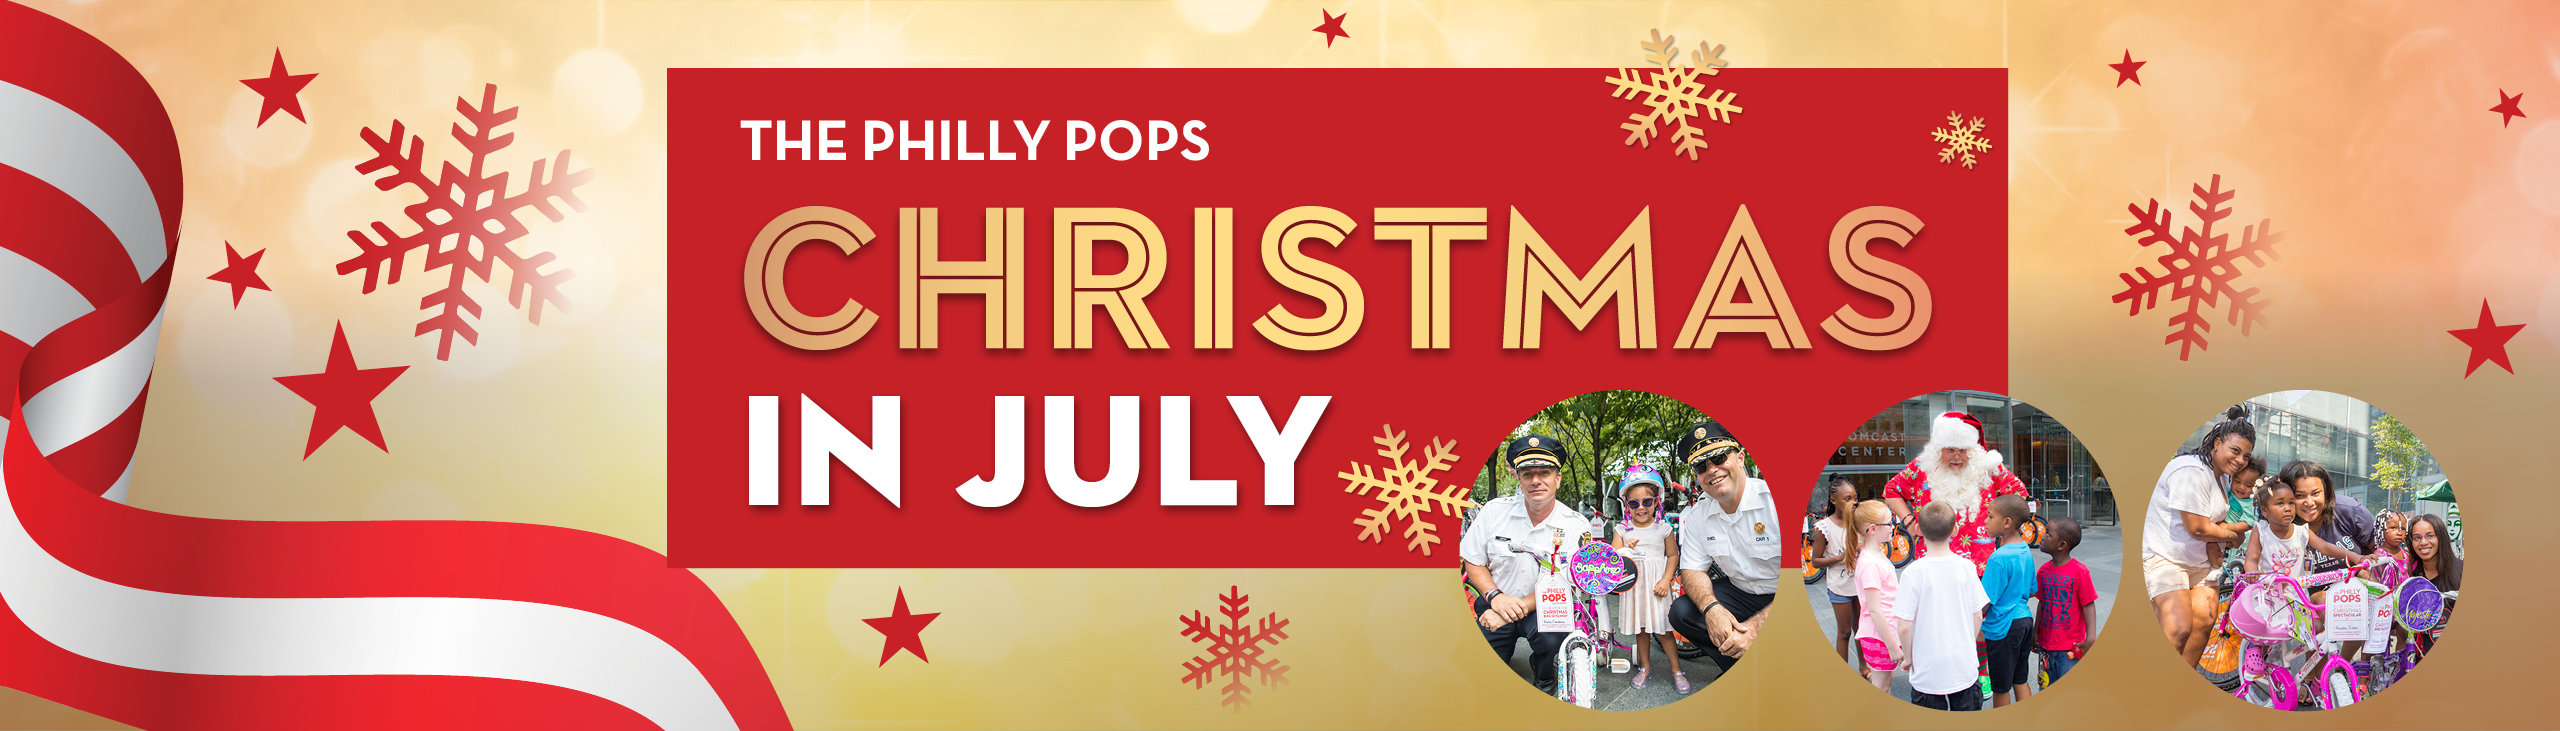 the philly pops christmas in july banner